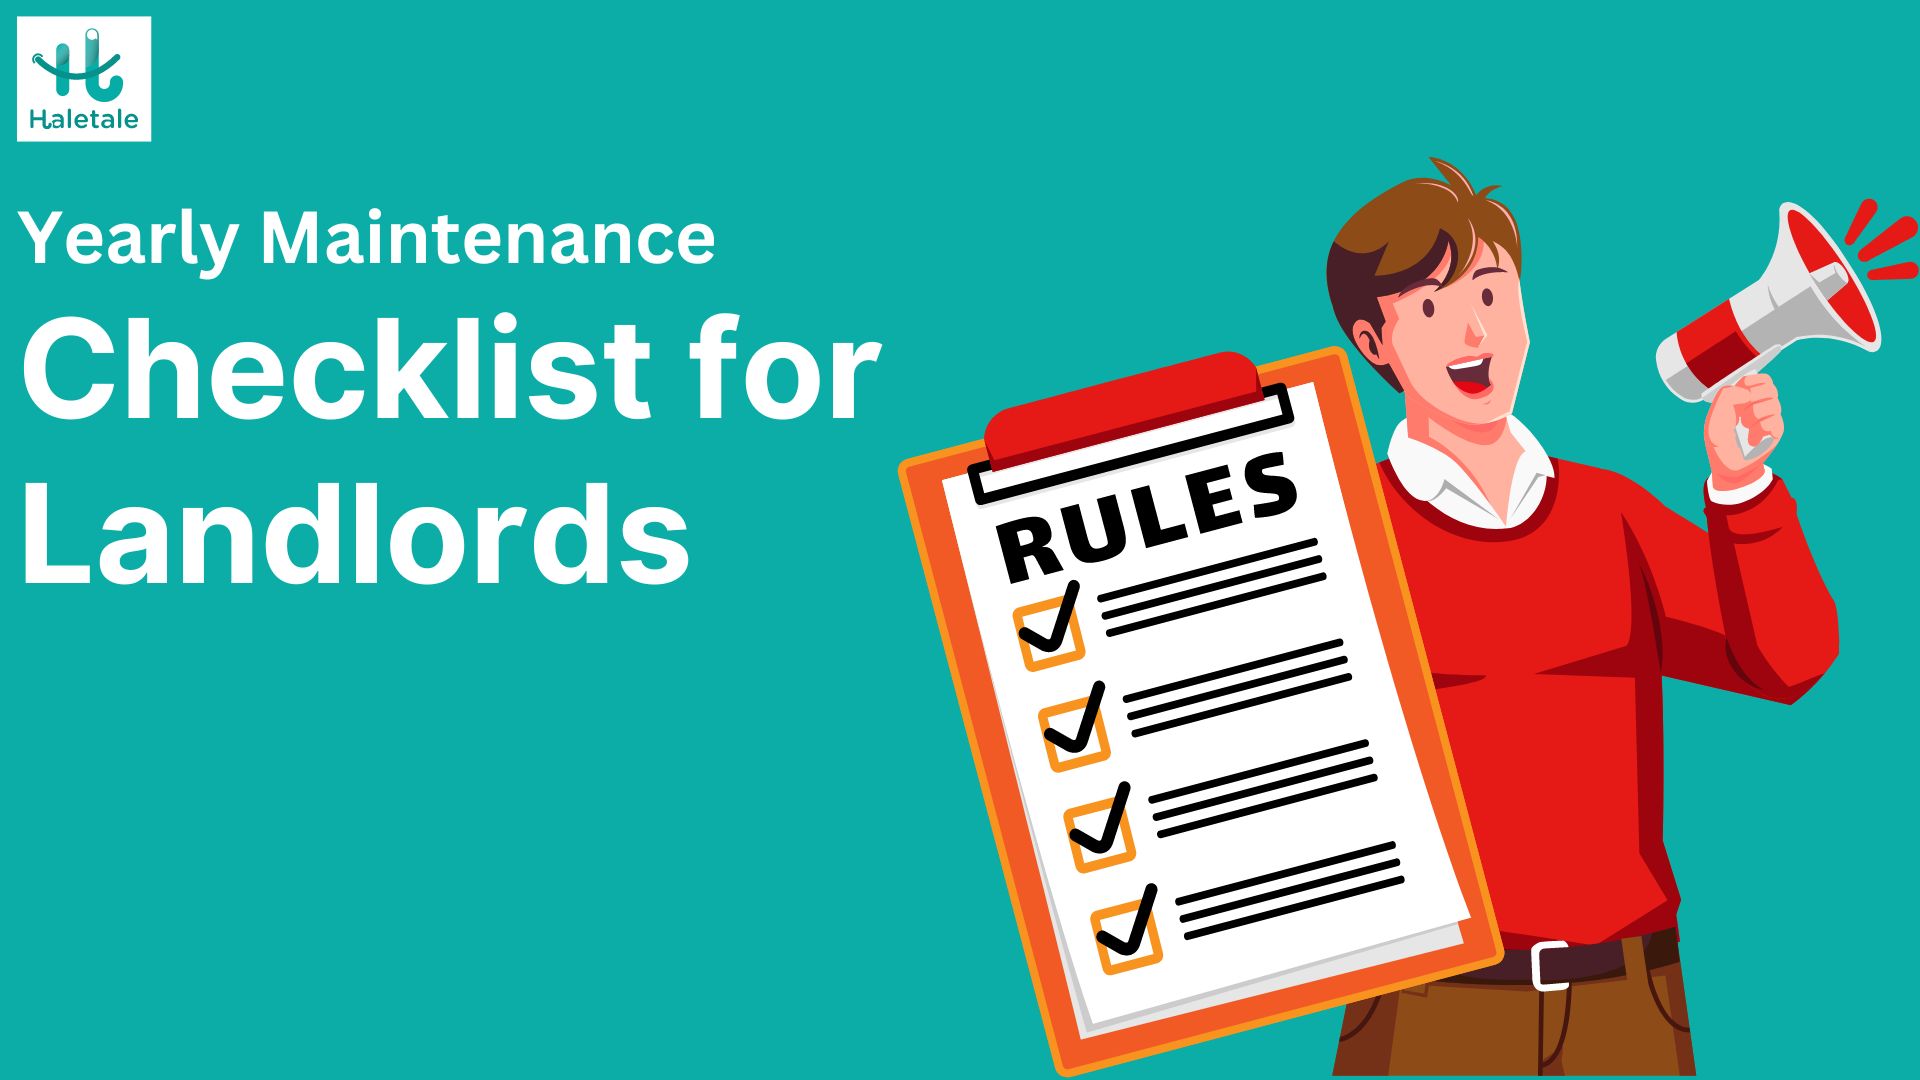 Yearly Maintenance Checklist for Landlords